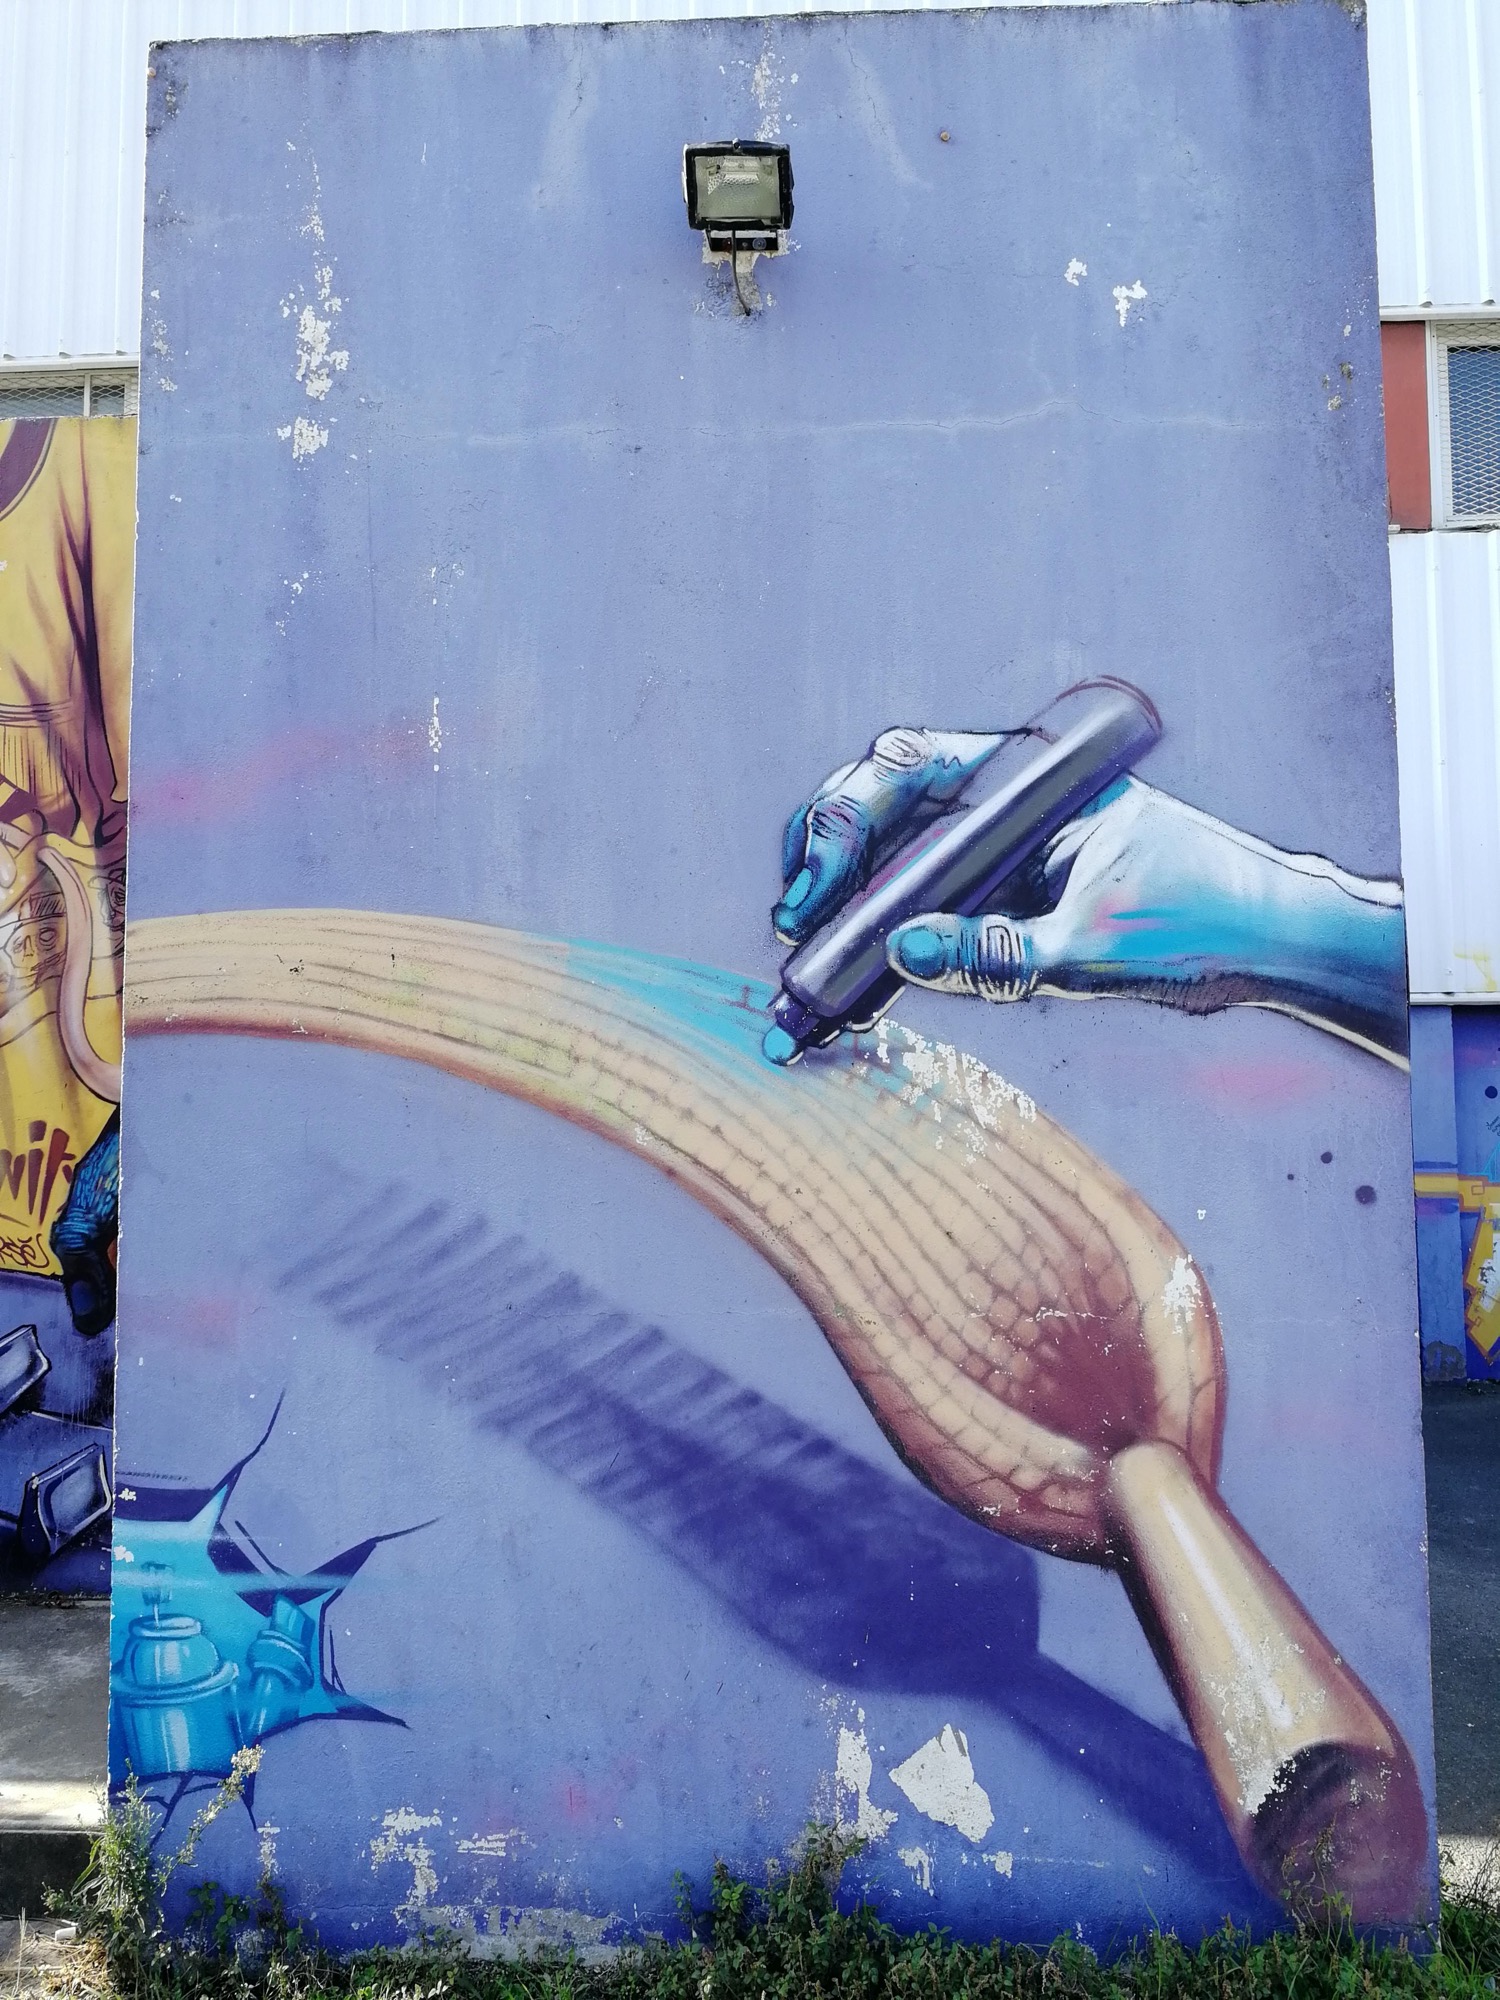 Graffiti 488  captured by Rabot in Nantes France